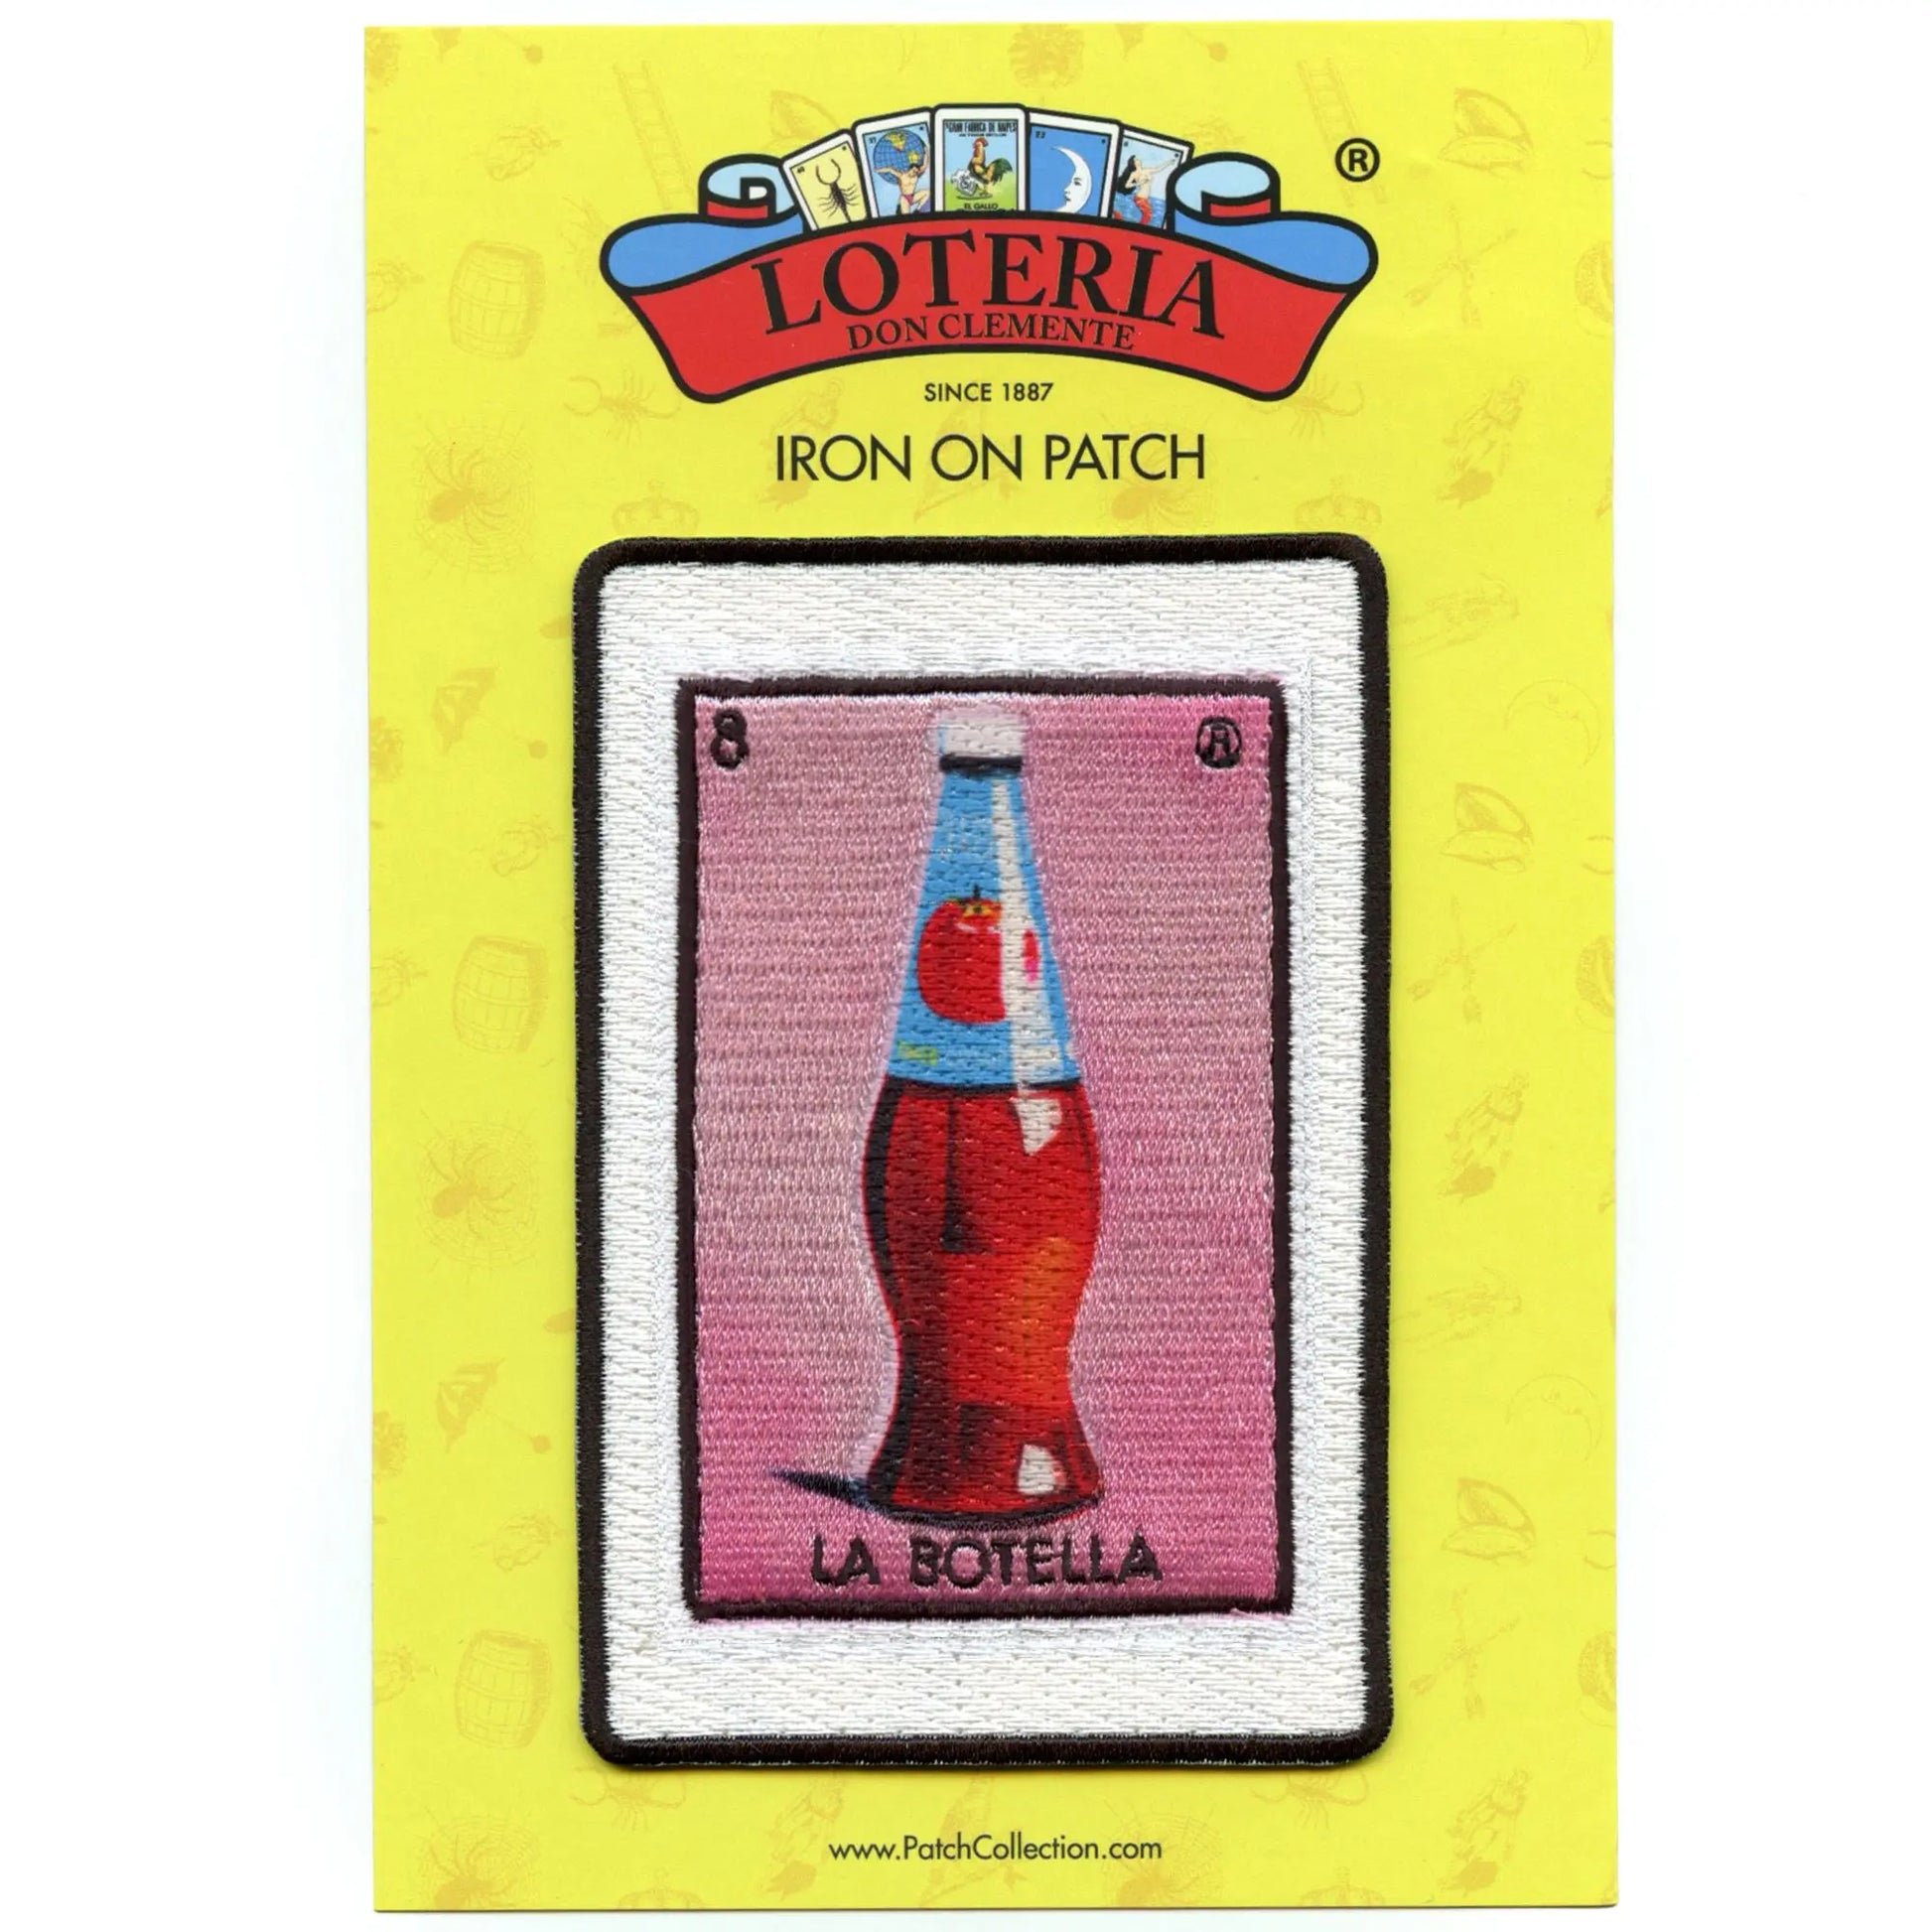 La Botella 8 Patch Mexican Loteria Card Sublimated Embroidery Iron On